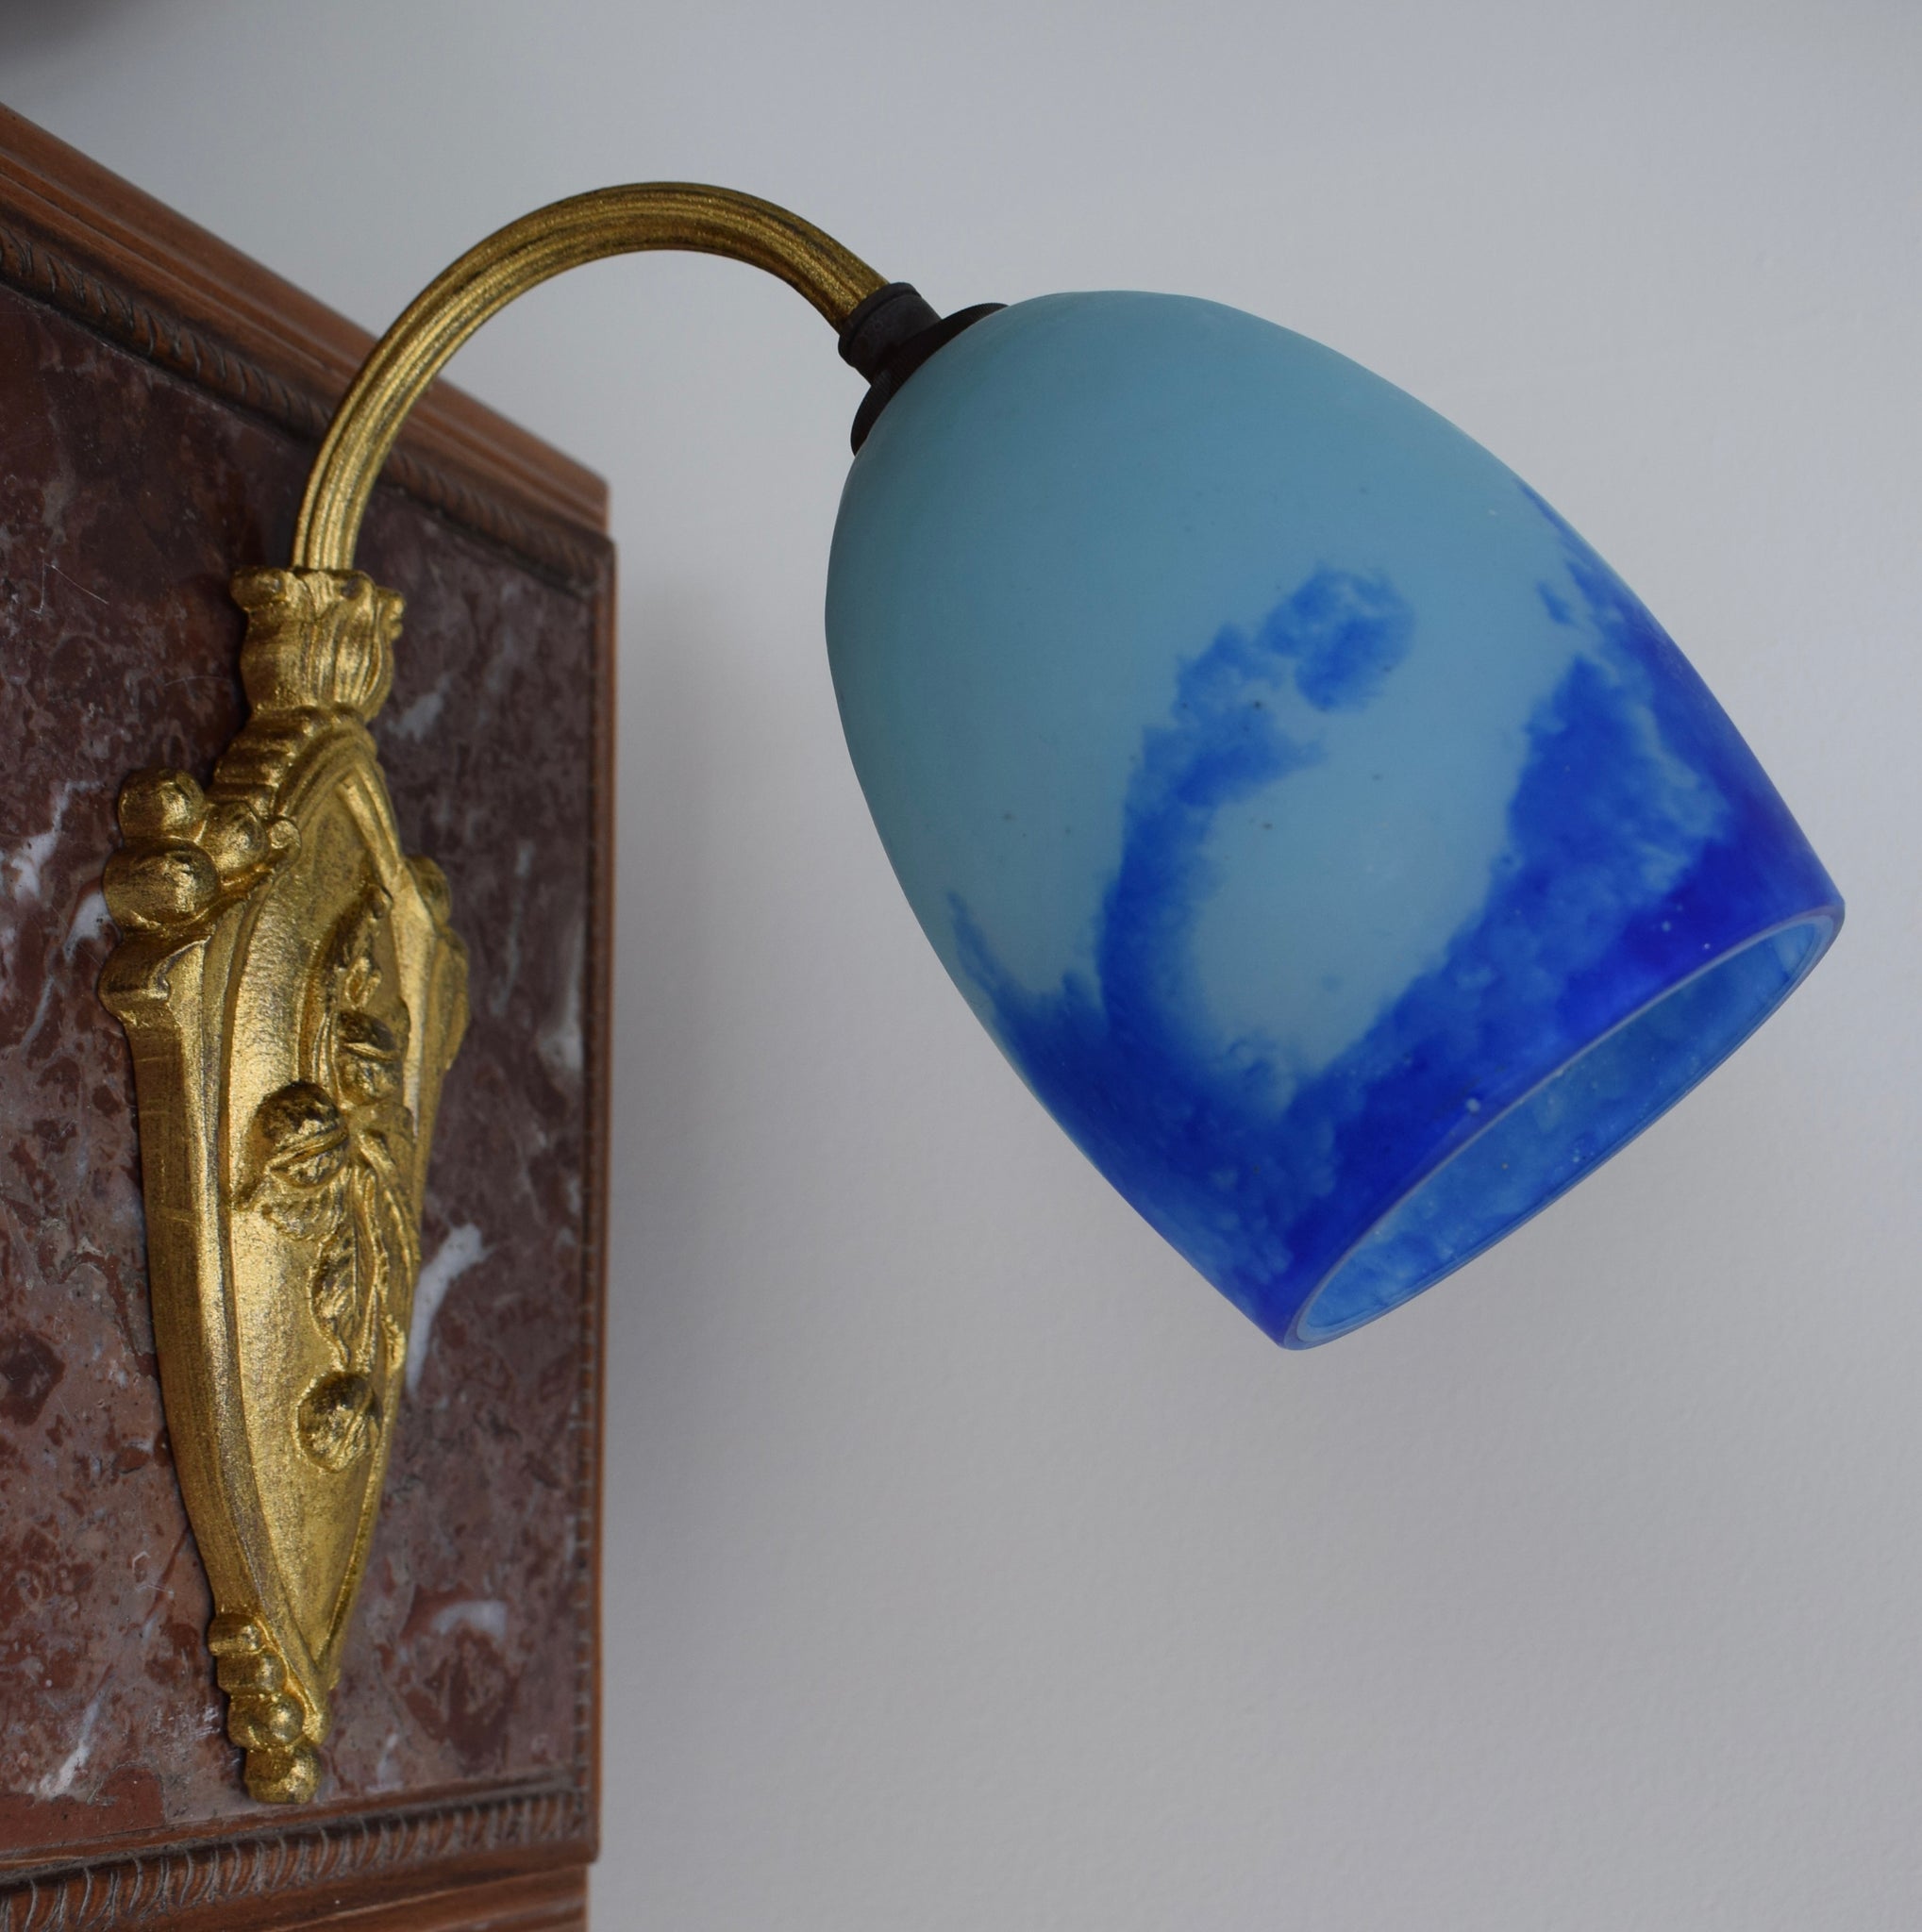 Bronze Wall Sconce with Blue Glass Lamp Shade, Art Deco Wall Lighting, French Vintage